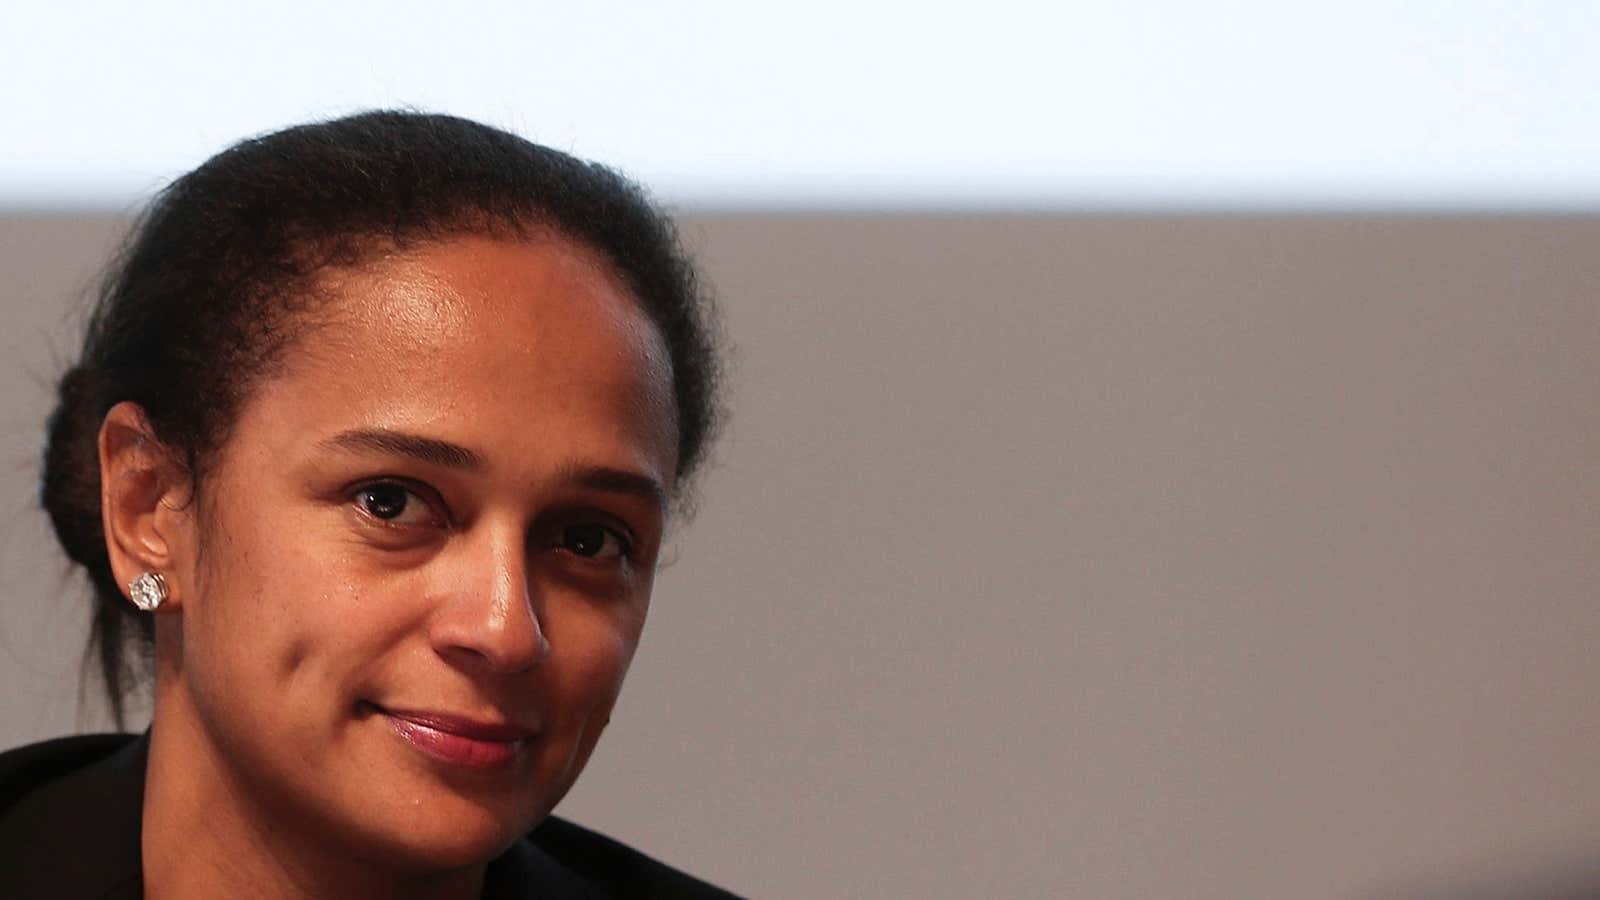 Isabel dos Santos, Africa’s richest woman and now head of Angola’s state oil company.